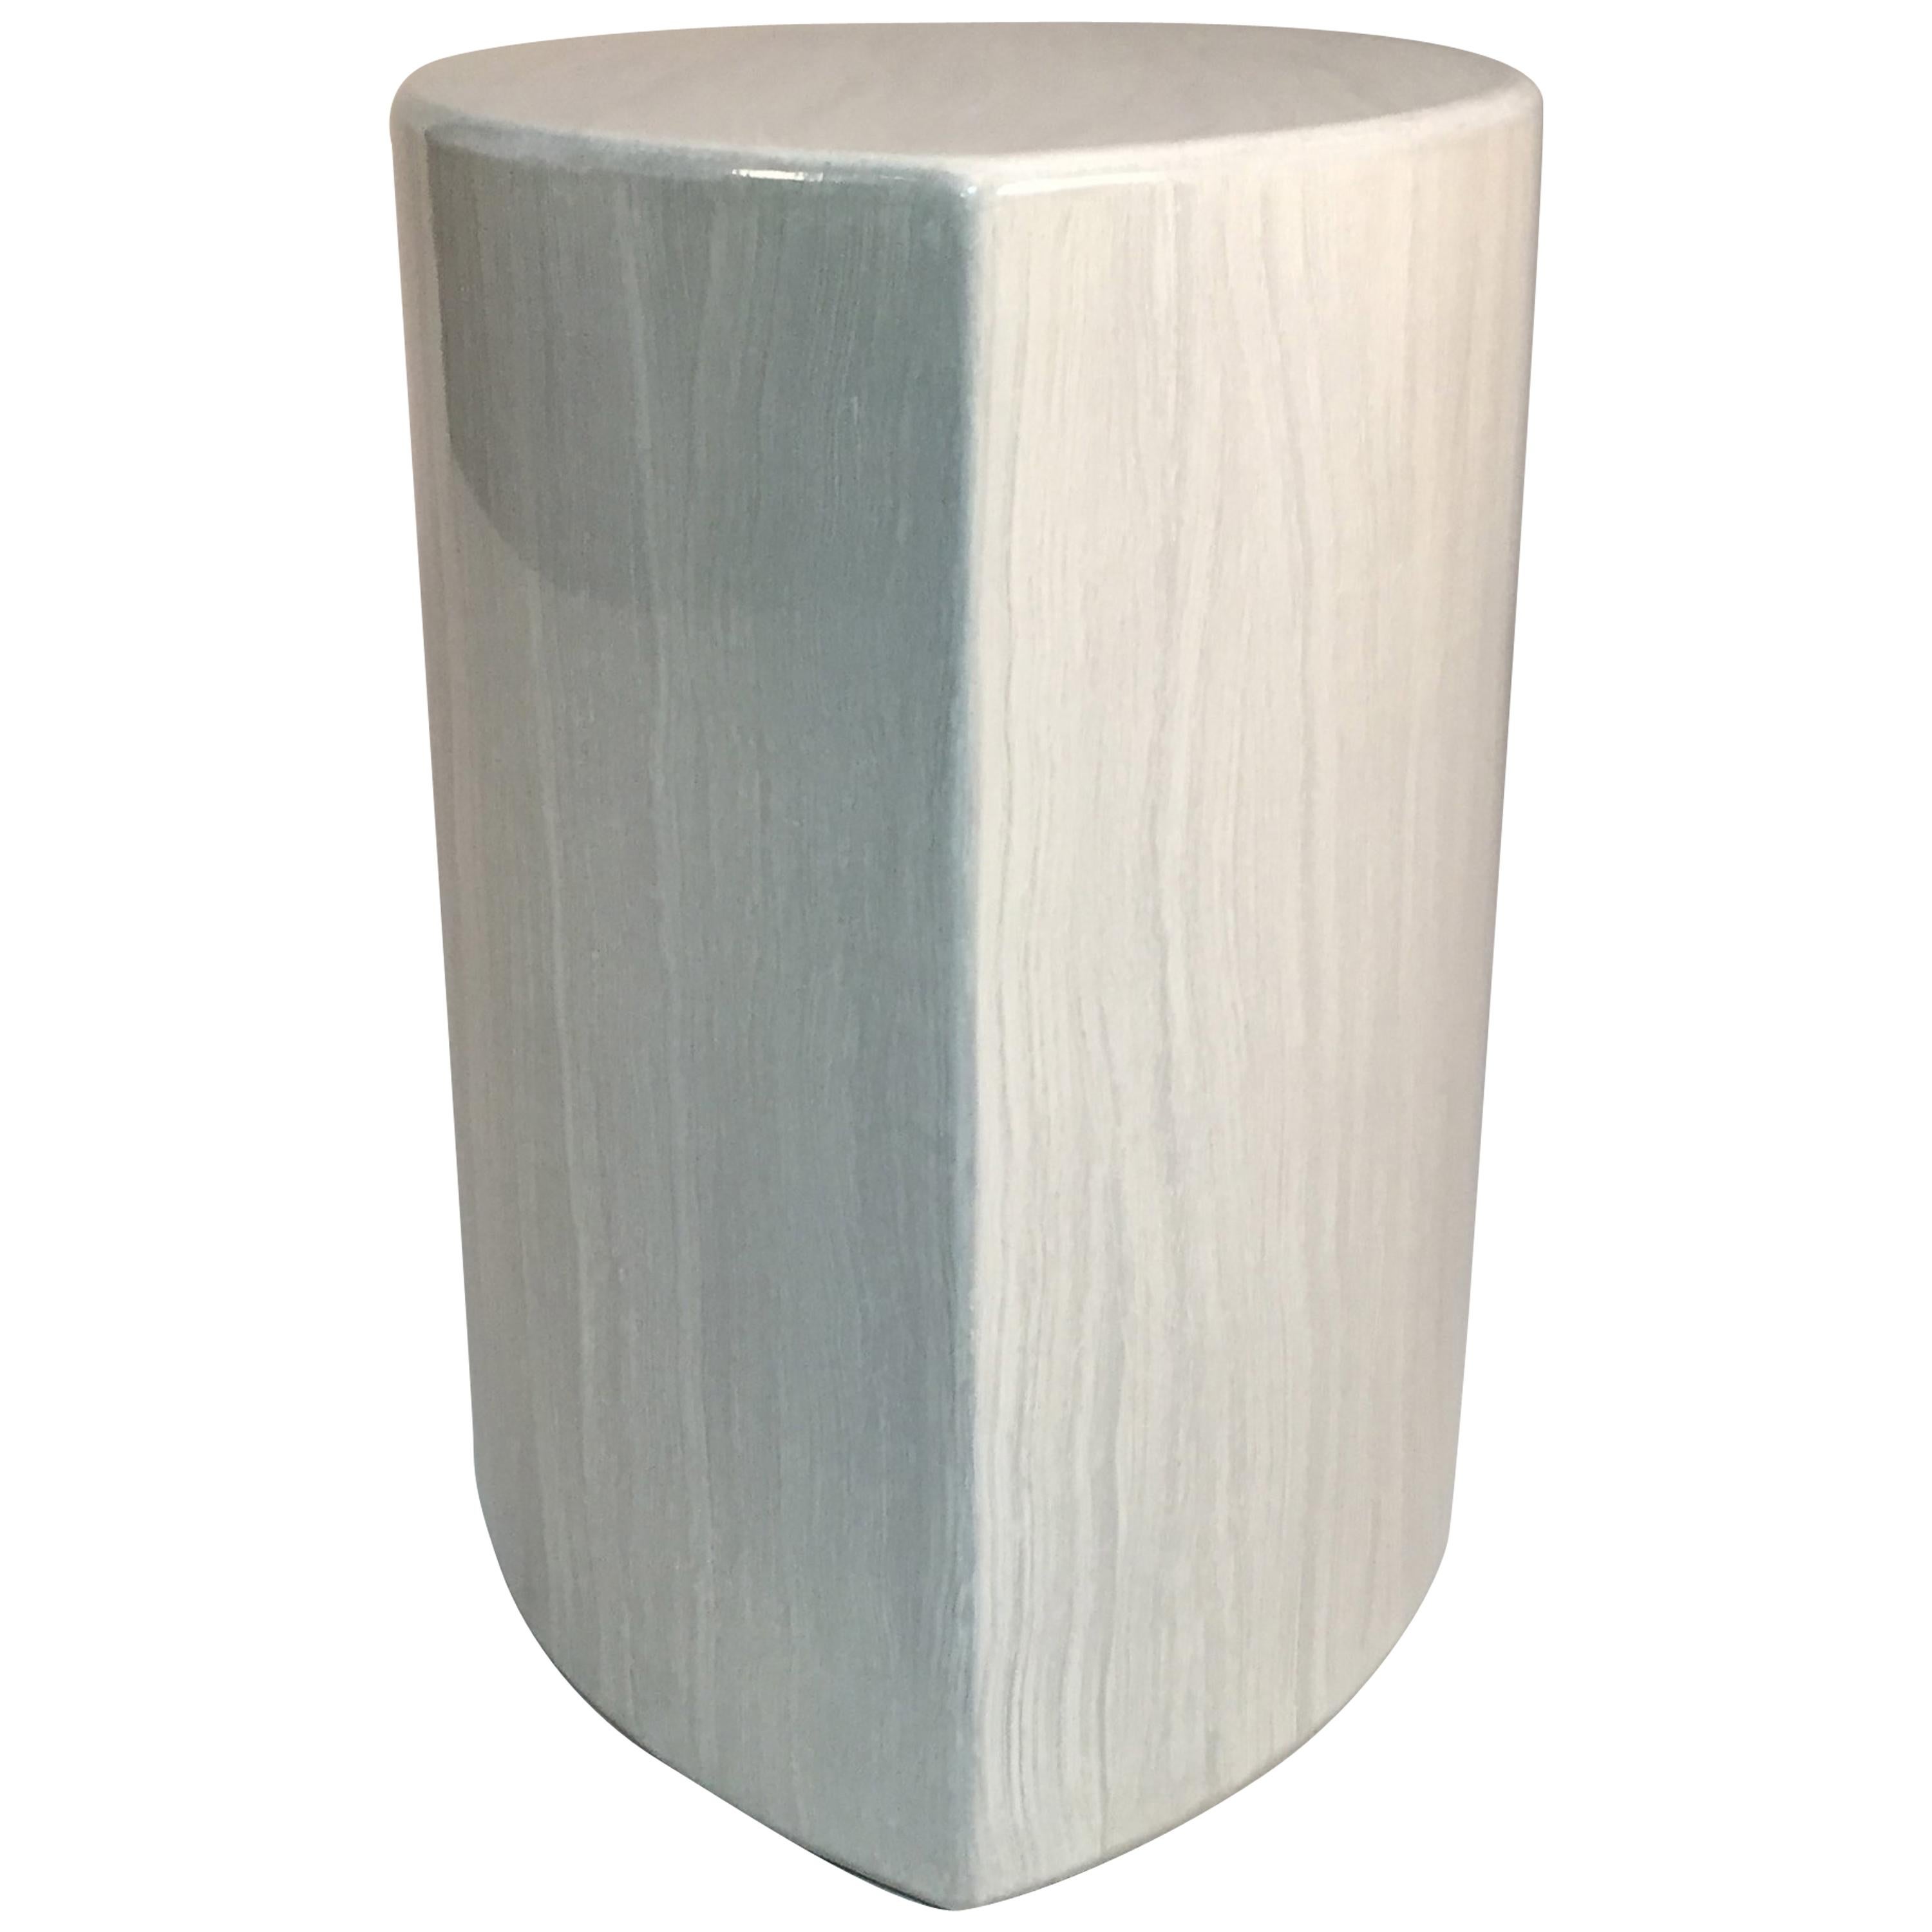 White Faux Travertine Stone Lacquered Gloss Side Table, Seat For Sale